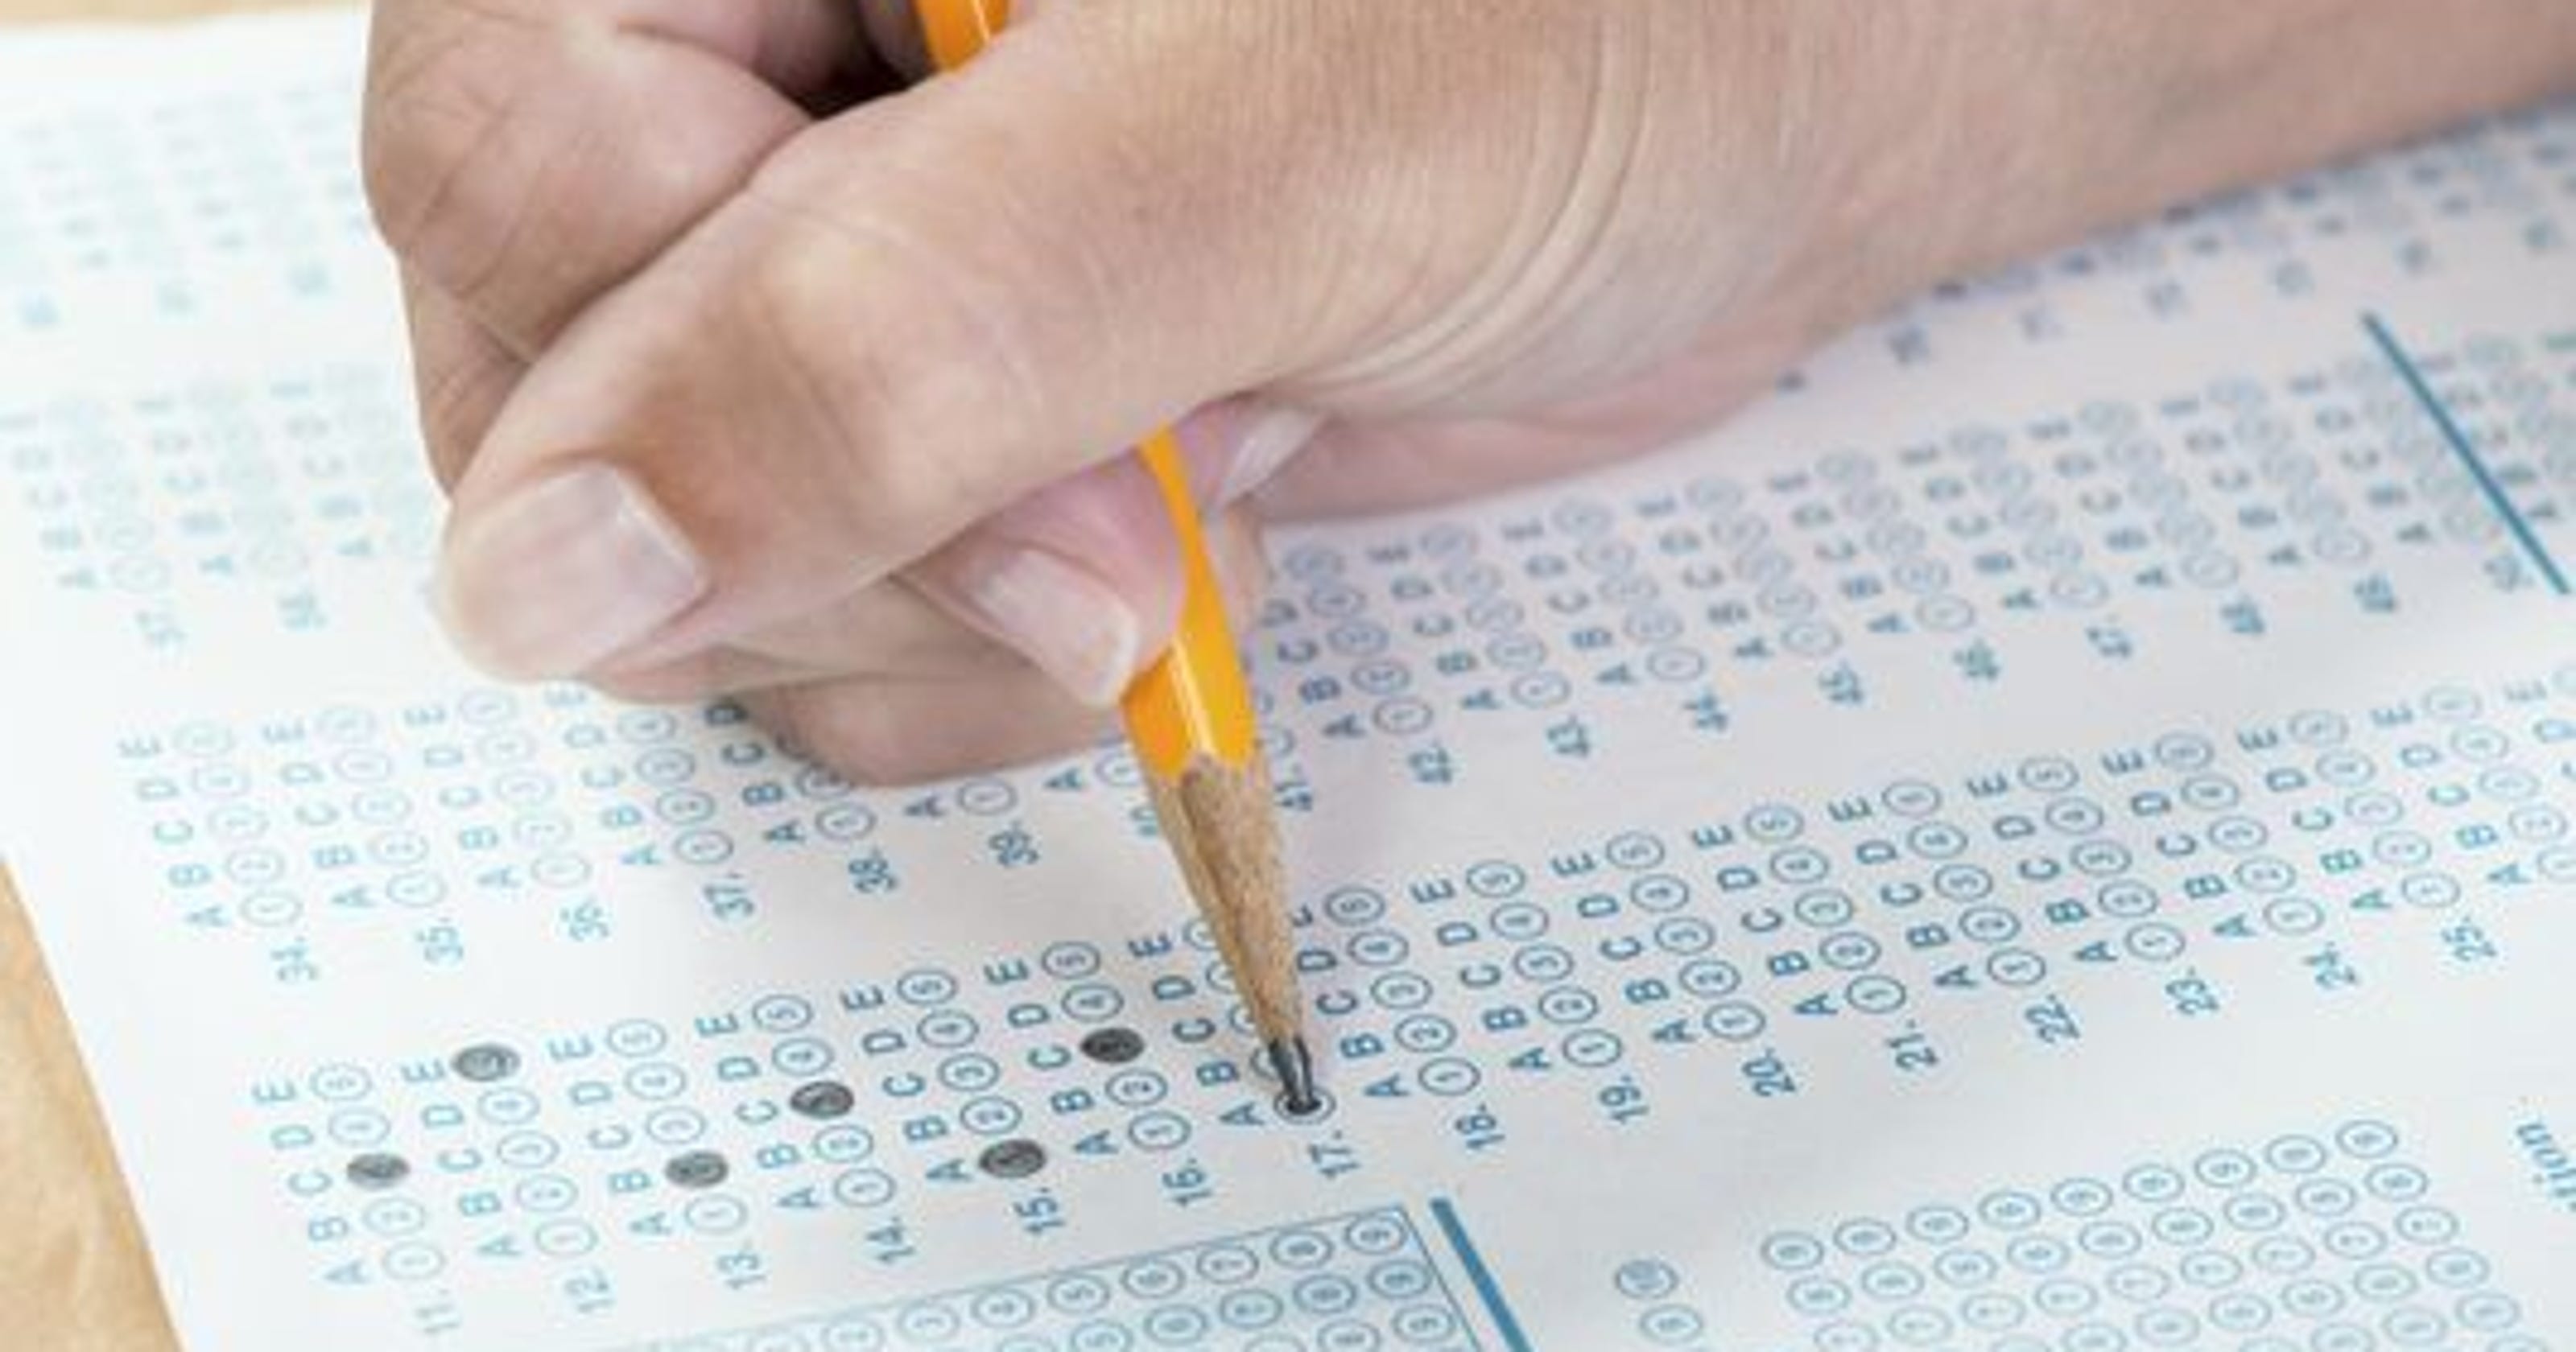 SAT or ACT? Which test should you take for college admissions?